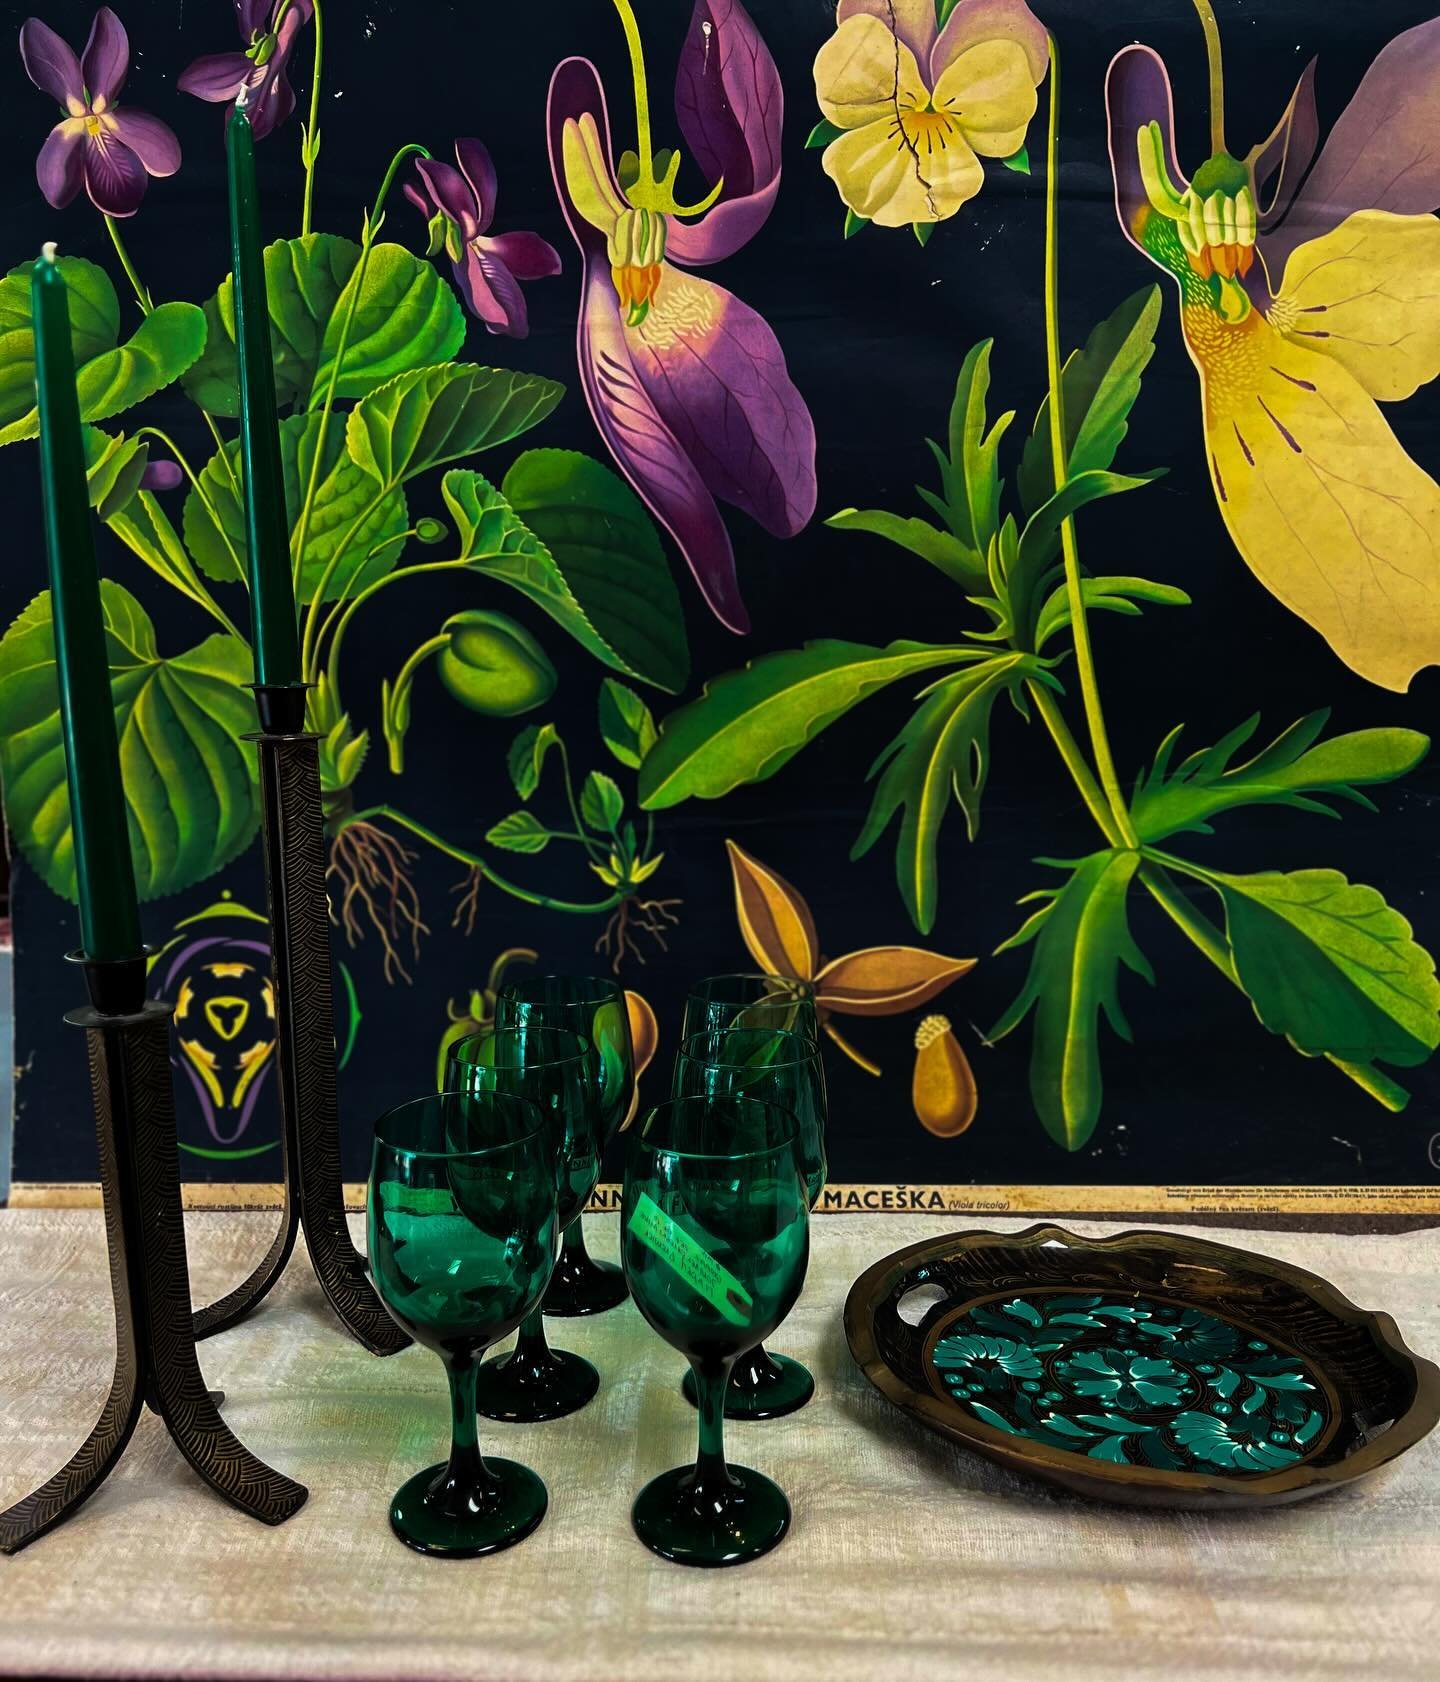 Let&rsquo;s mix up the feed a little with something moody. All with hints of green, all available now in the shop.

Open 
Wednesday - Saturday
11-5

Sunday
11-4

1890 N Main St.
Walnut Creek, CA

#vintagefurnitureforsale #vintagedecor #vintagebayarea